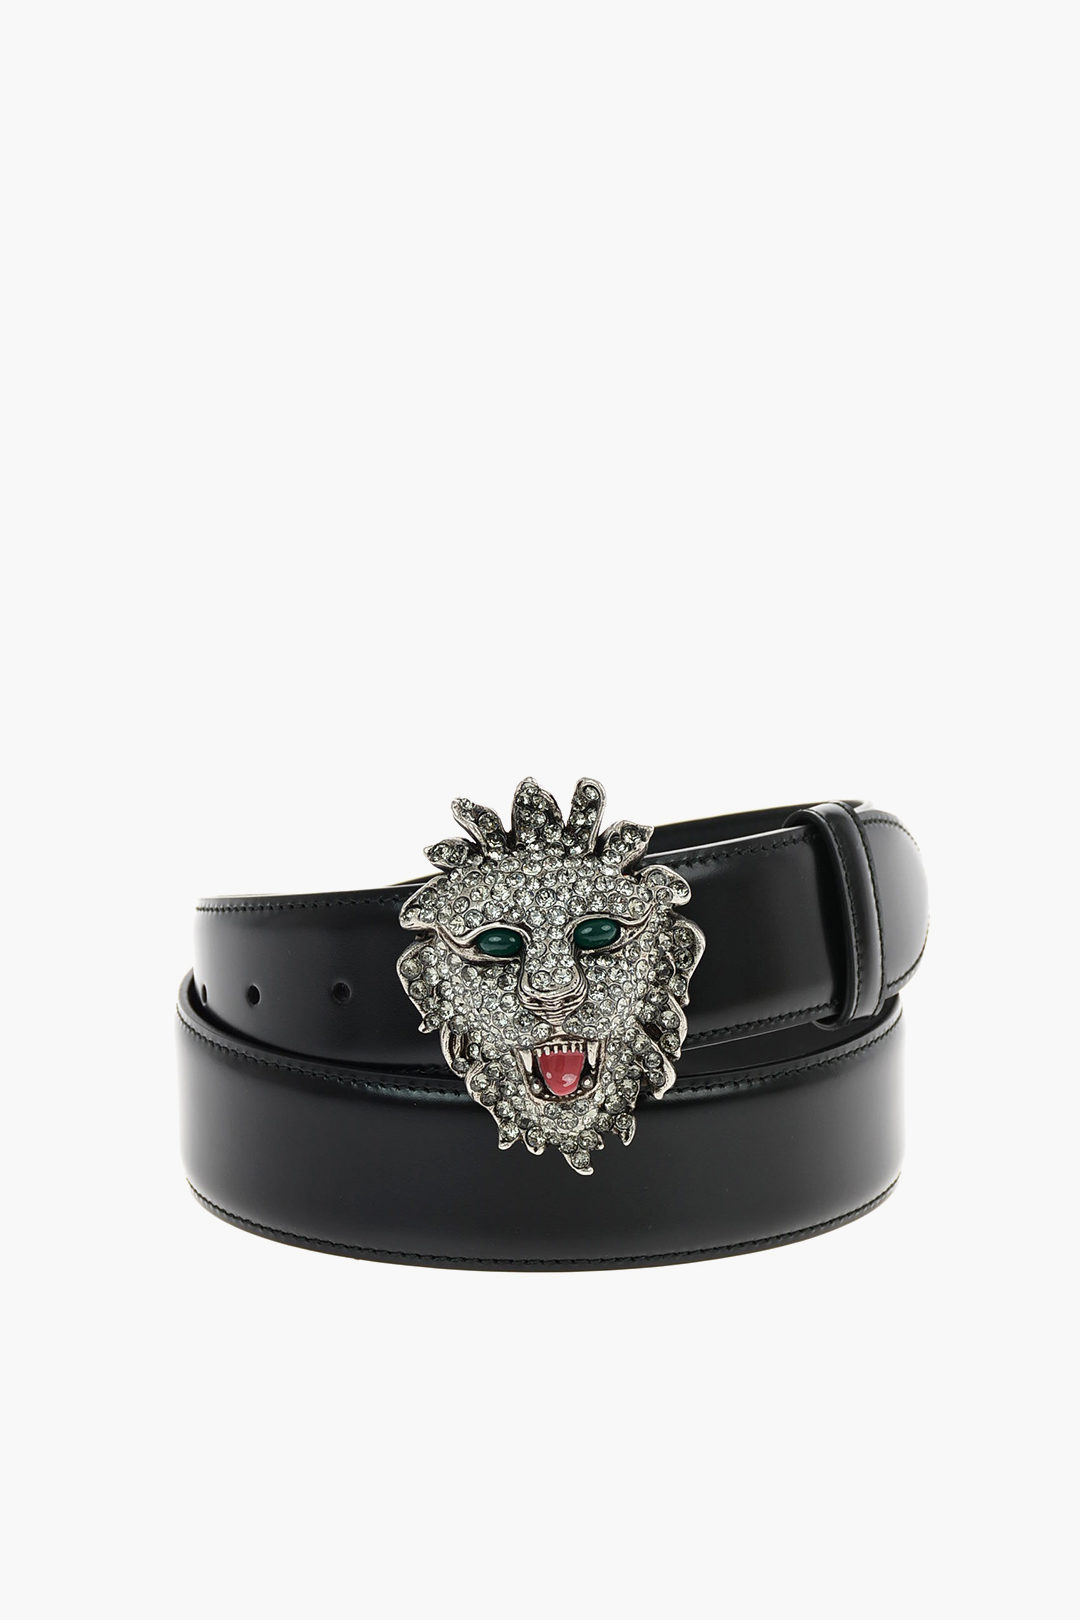 Gucci 40mm Leather Belt with Lion Head Buckle men - Glamood Outlet